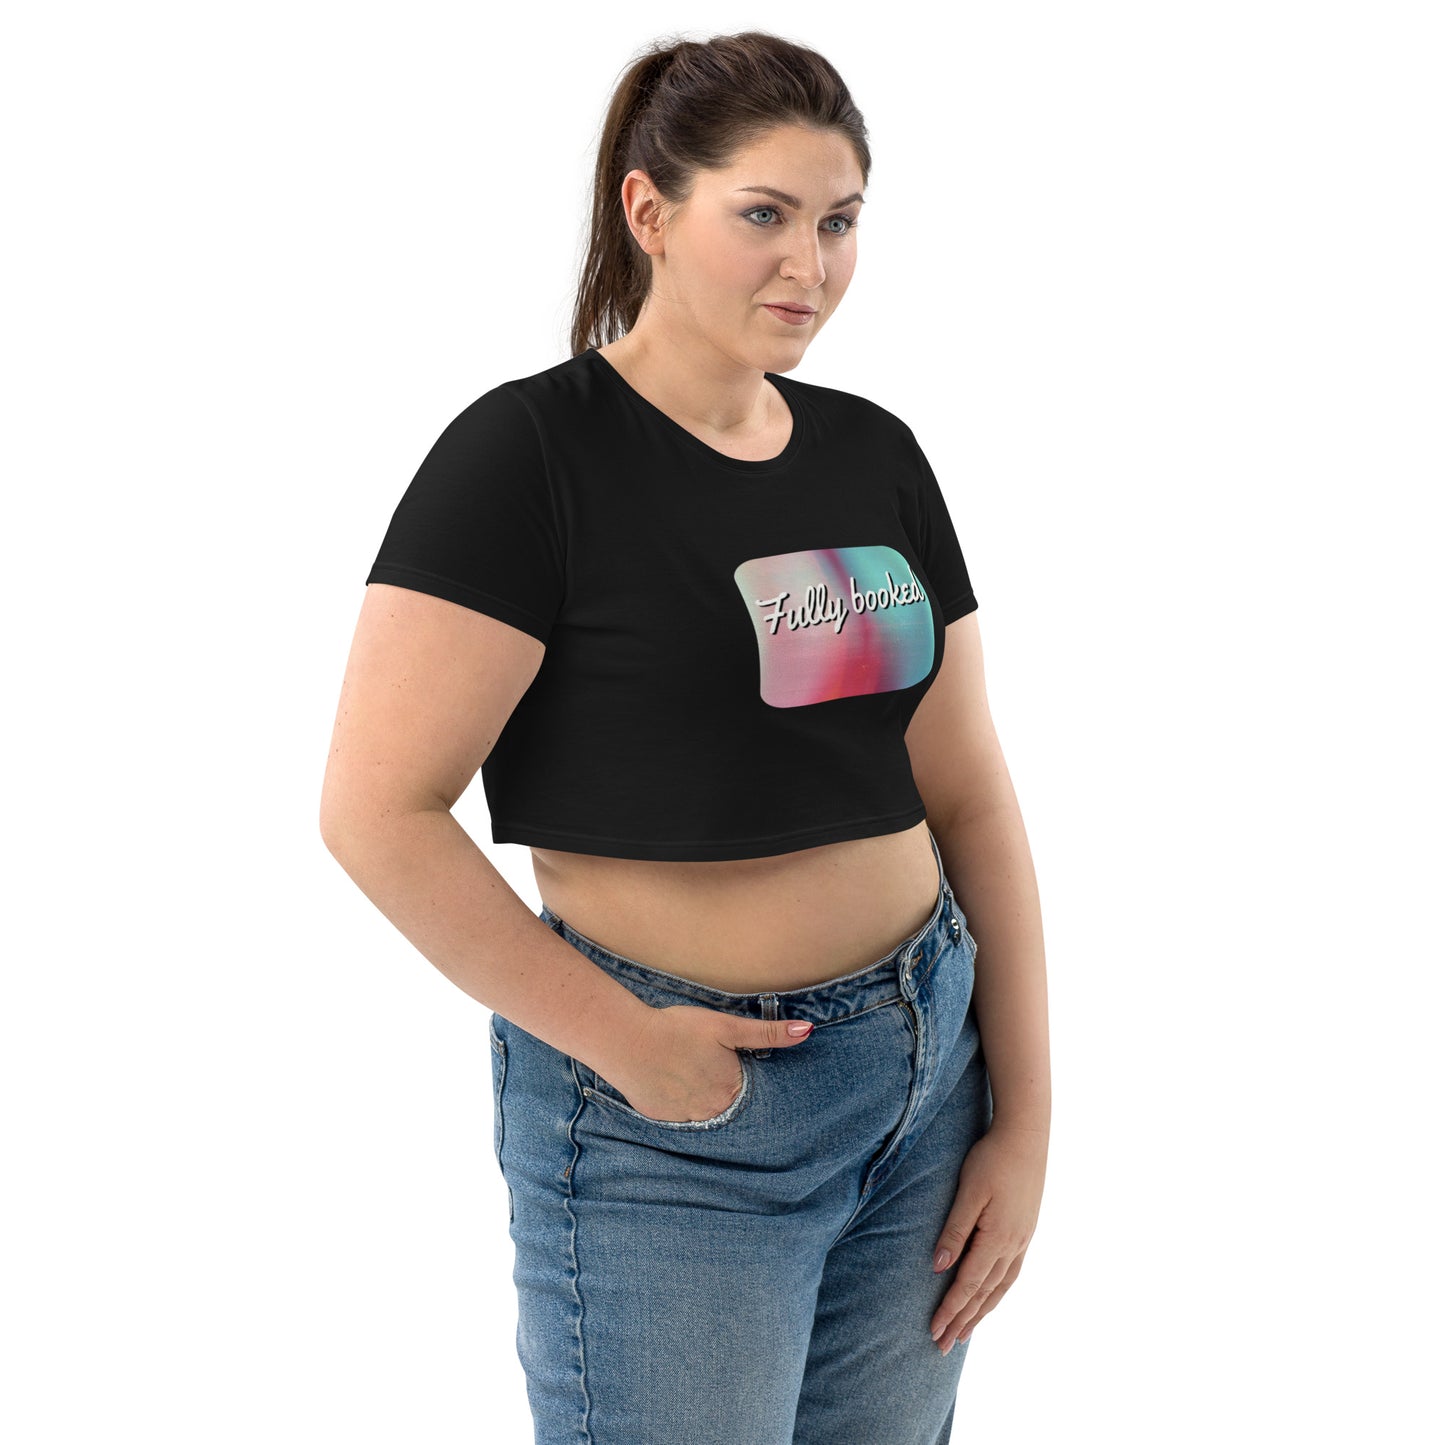 Fully booked Organic Crop Top